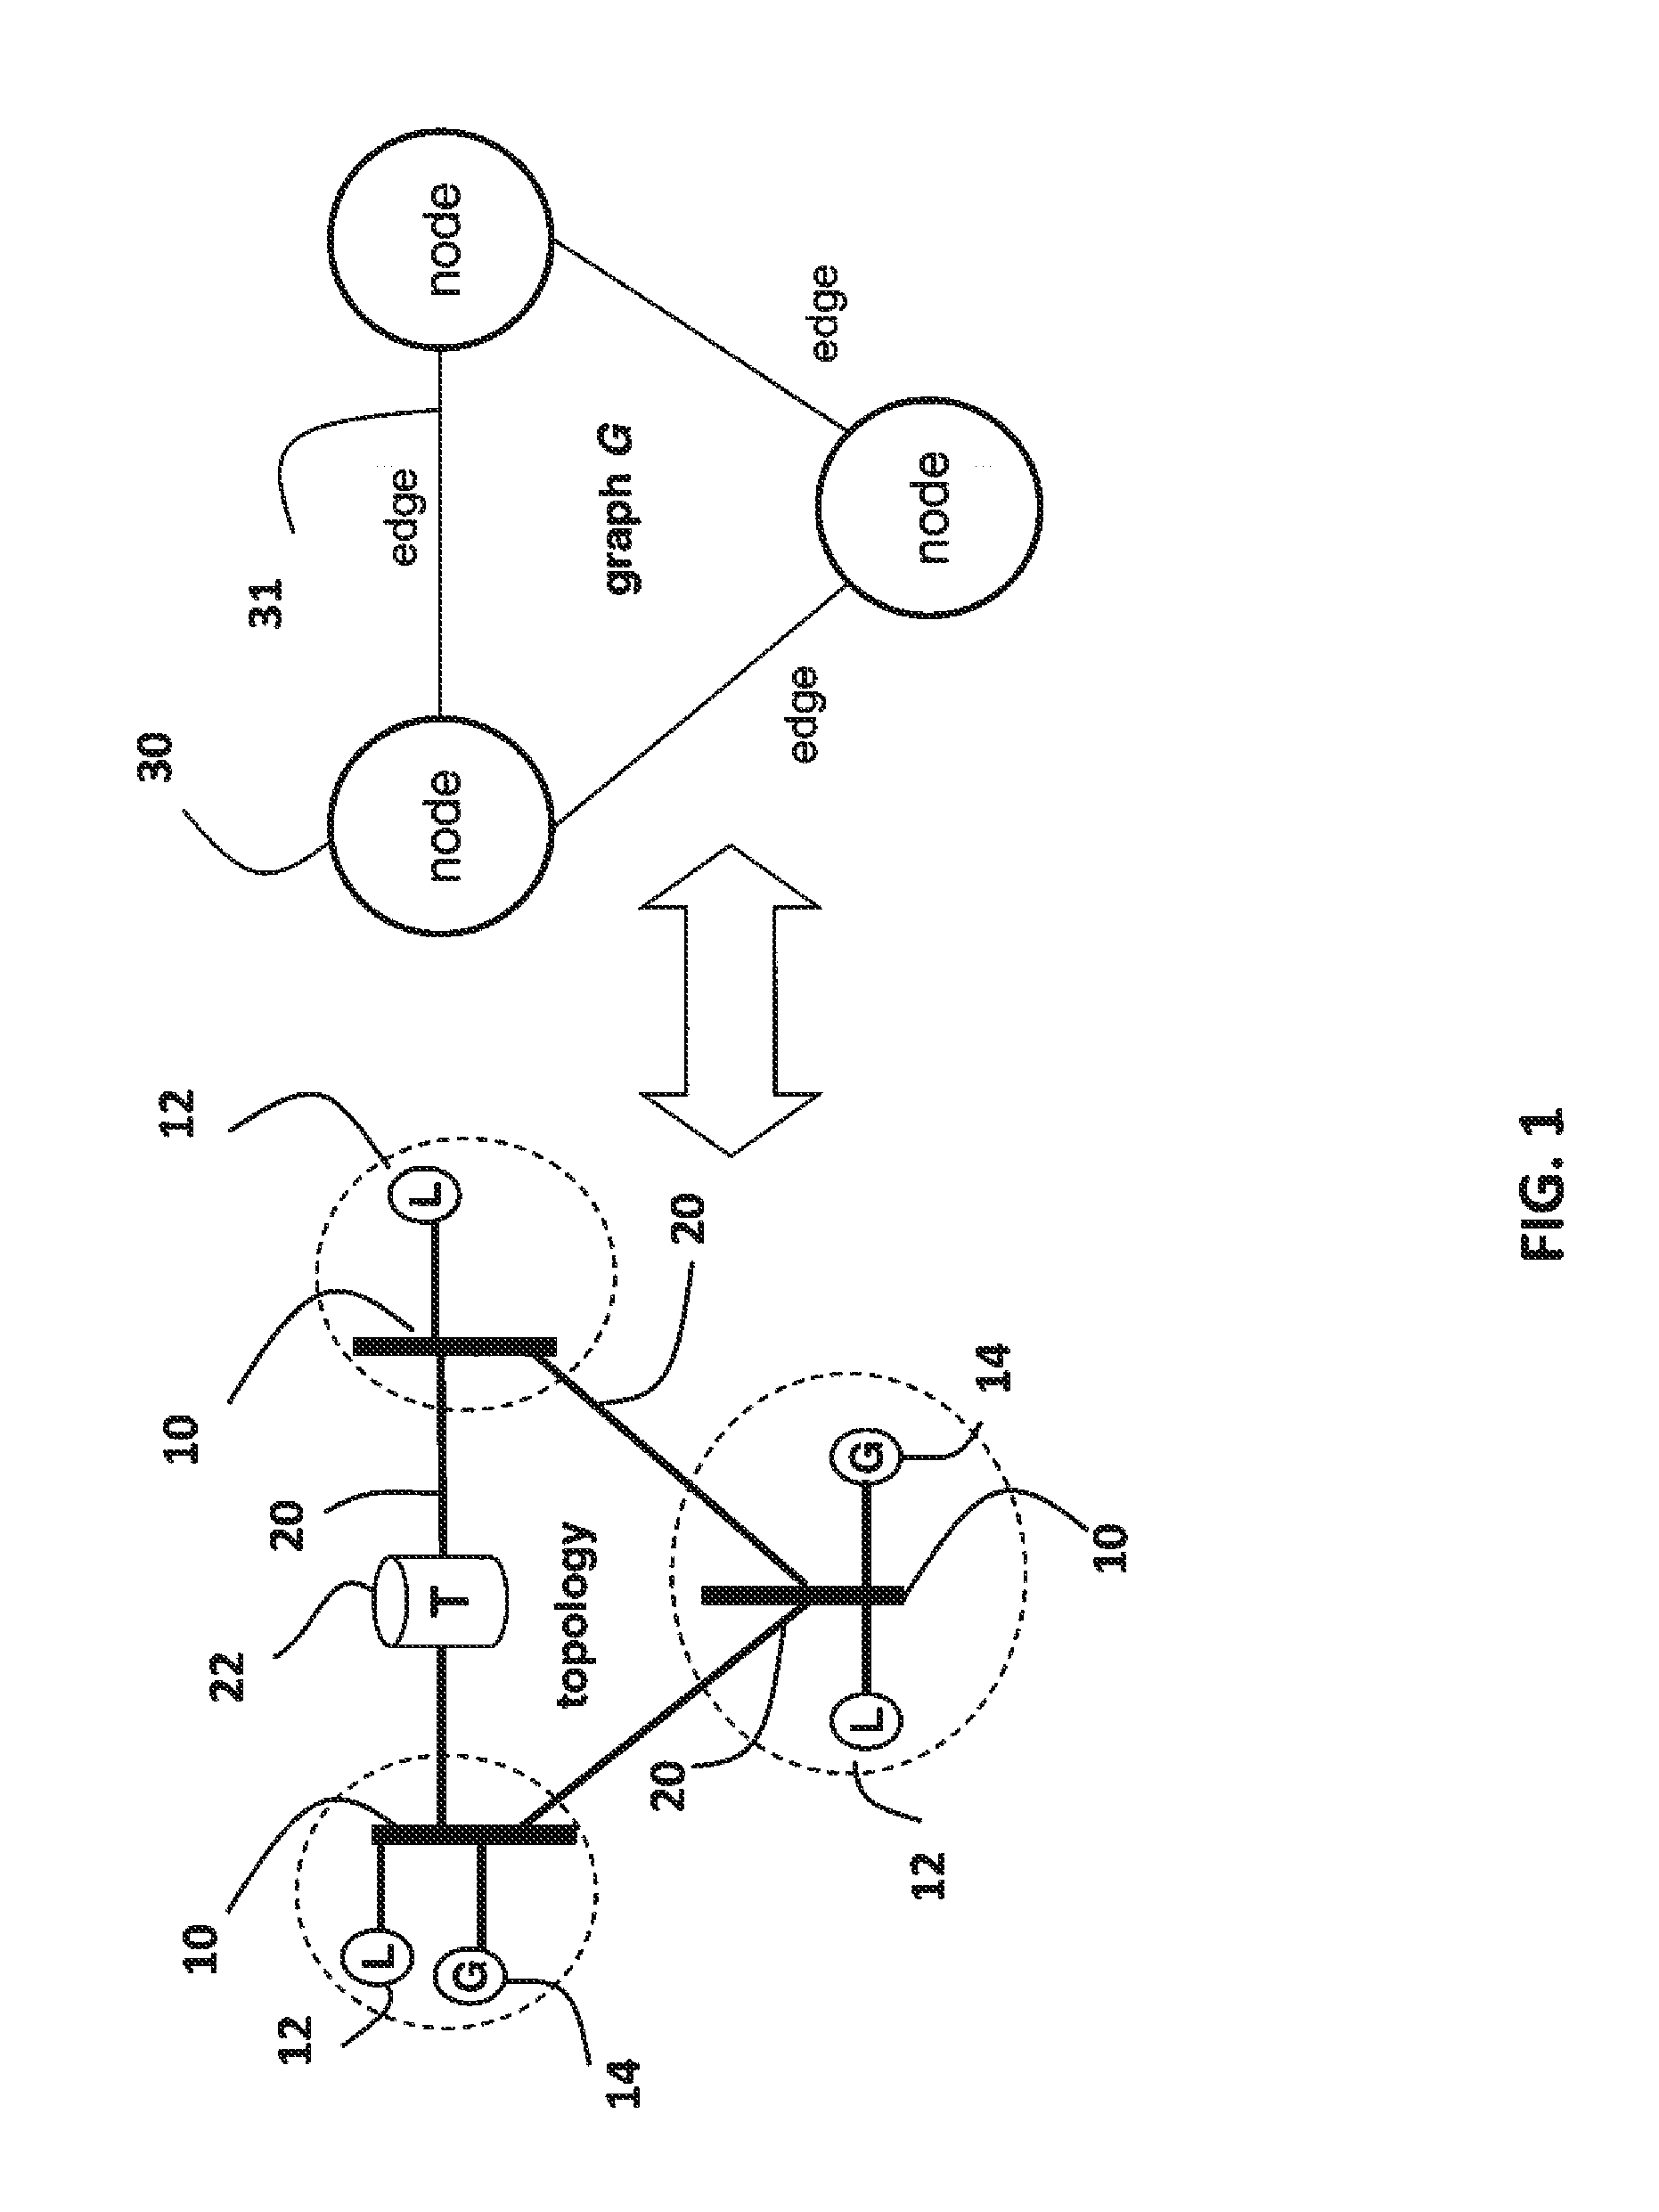 Method for Globally Optimizing Power Flows in Electric Networks